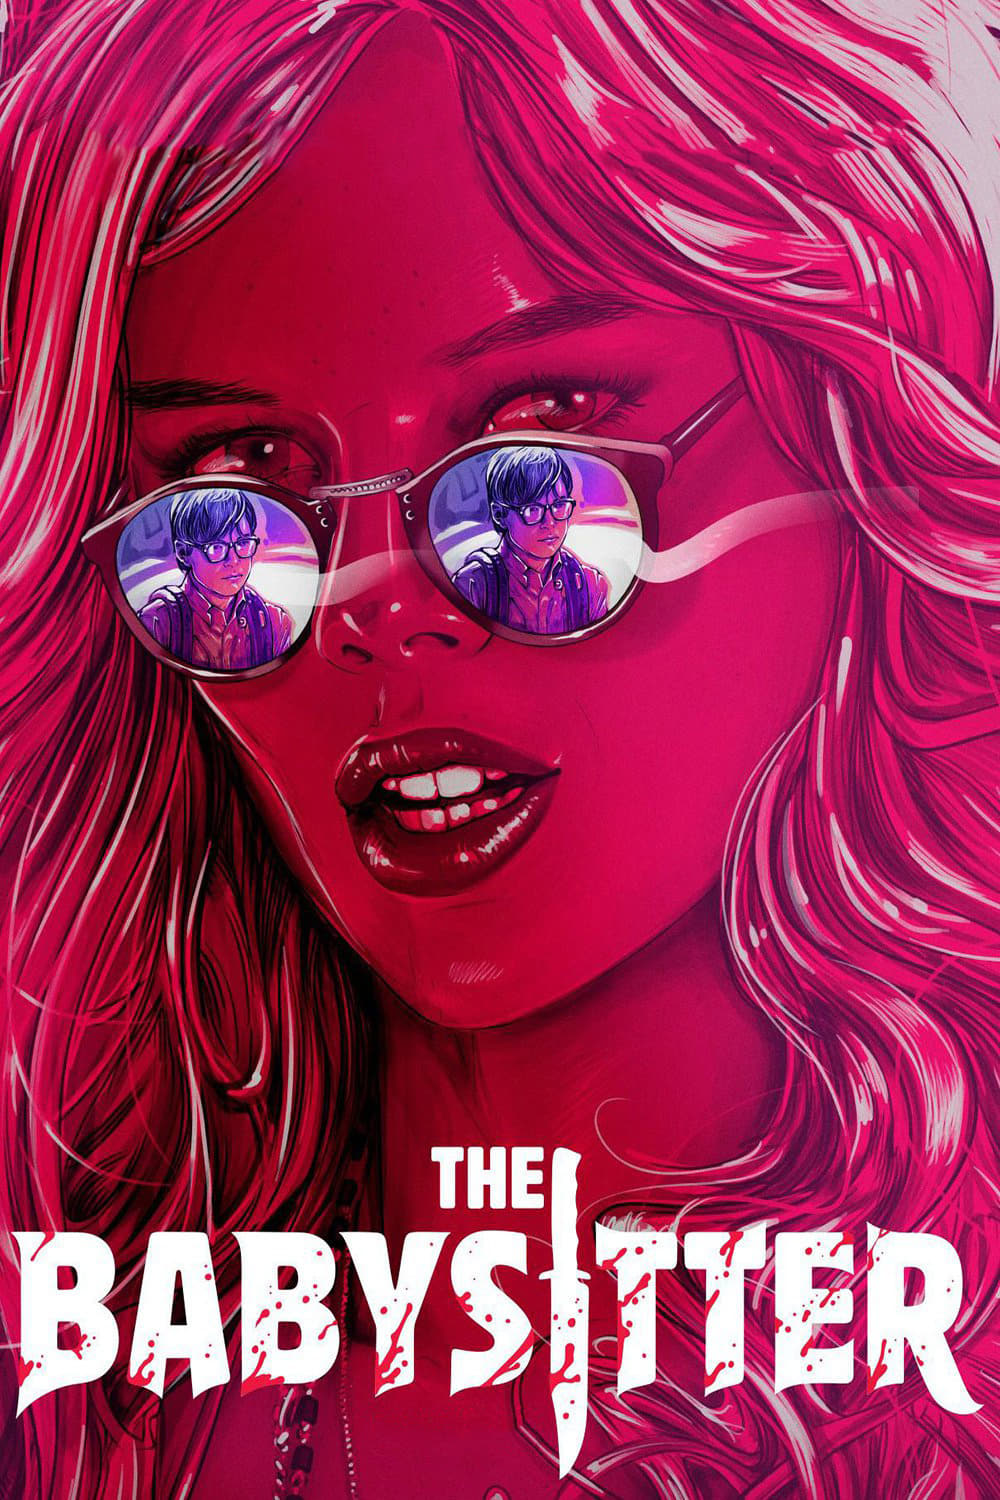 Poster for the movie "The Babysitter"